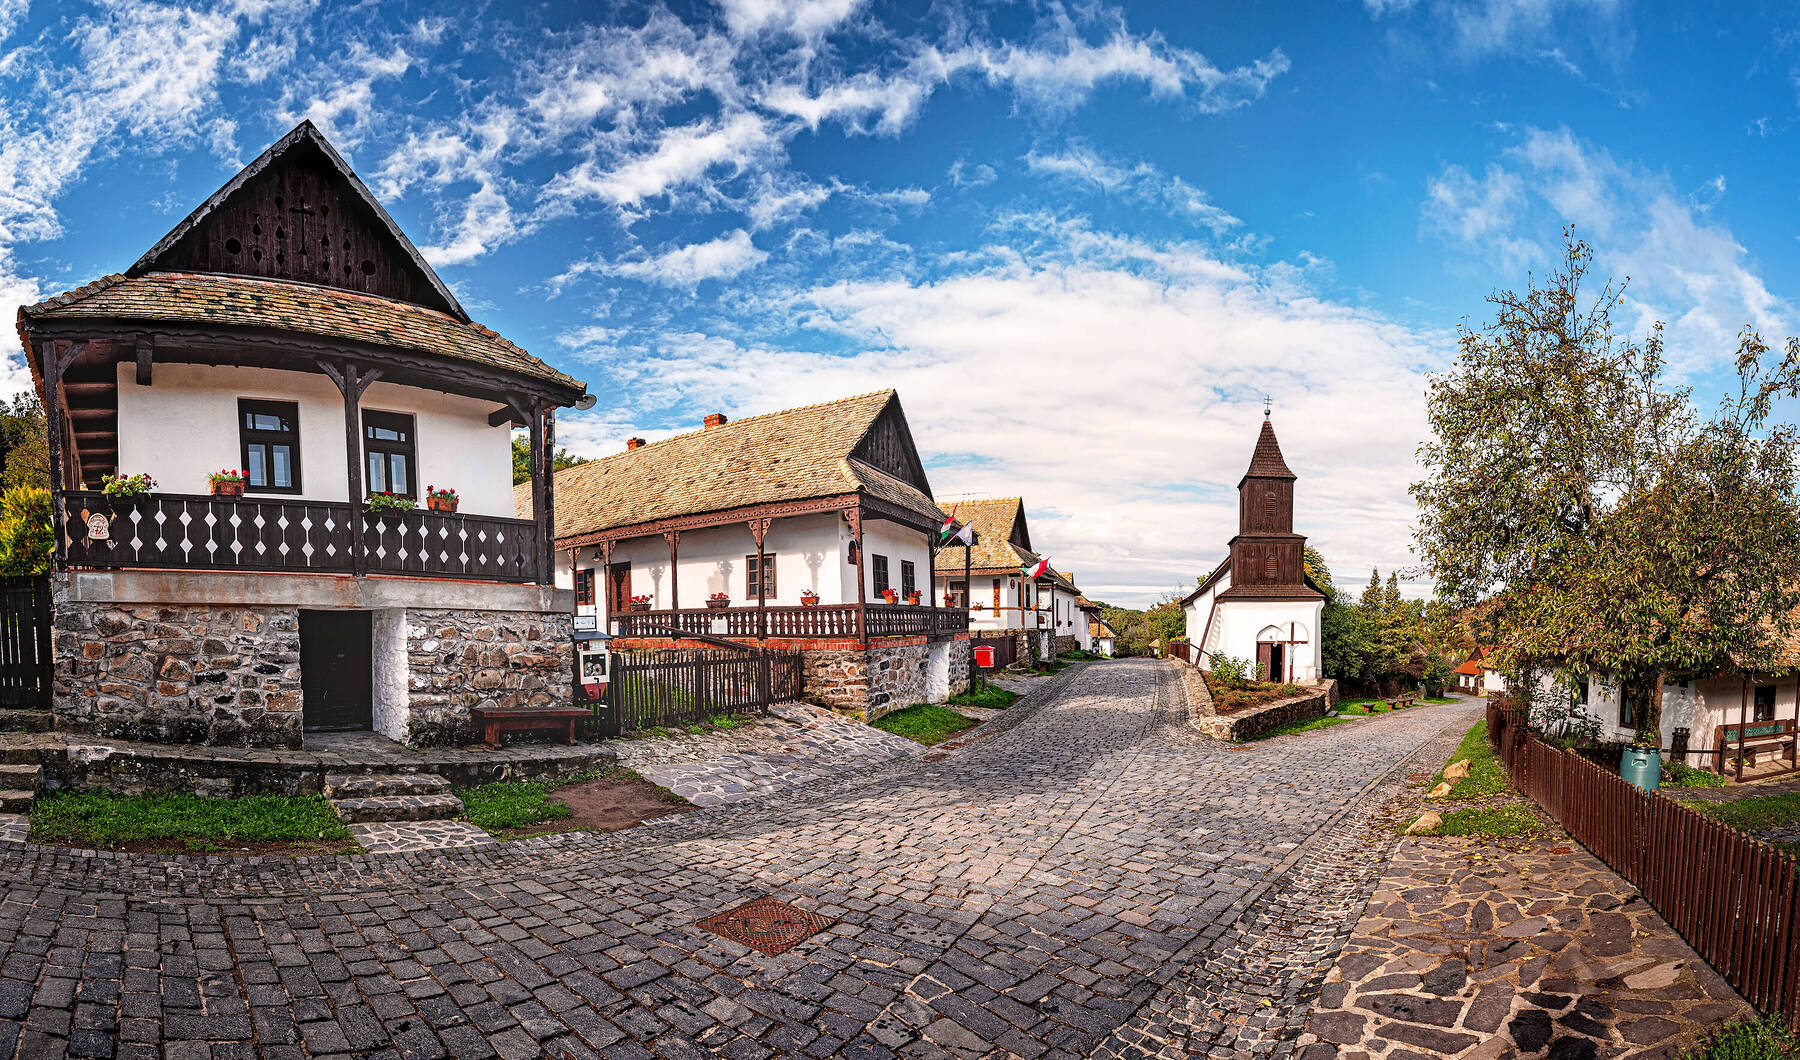 Discover the Old Village of Hollókő in Hungary | ASMALLWORLD